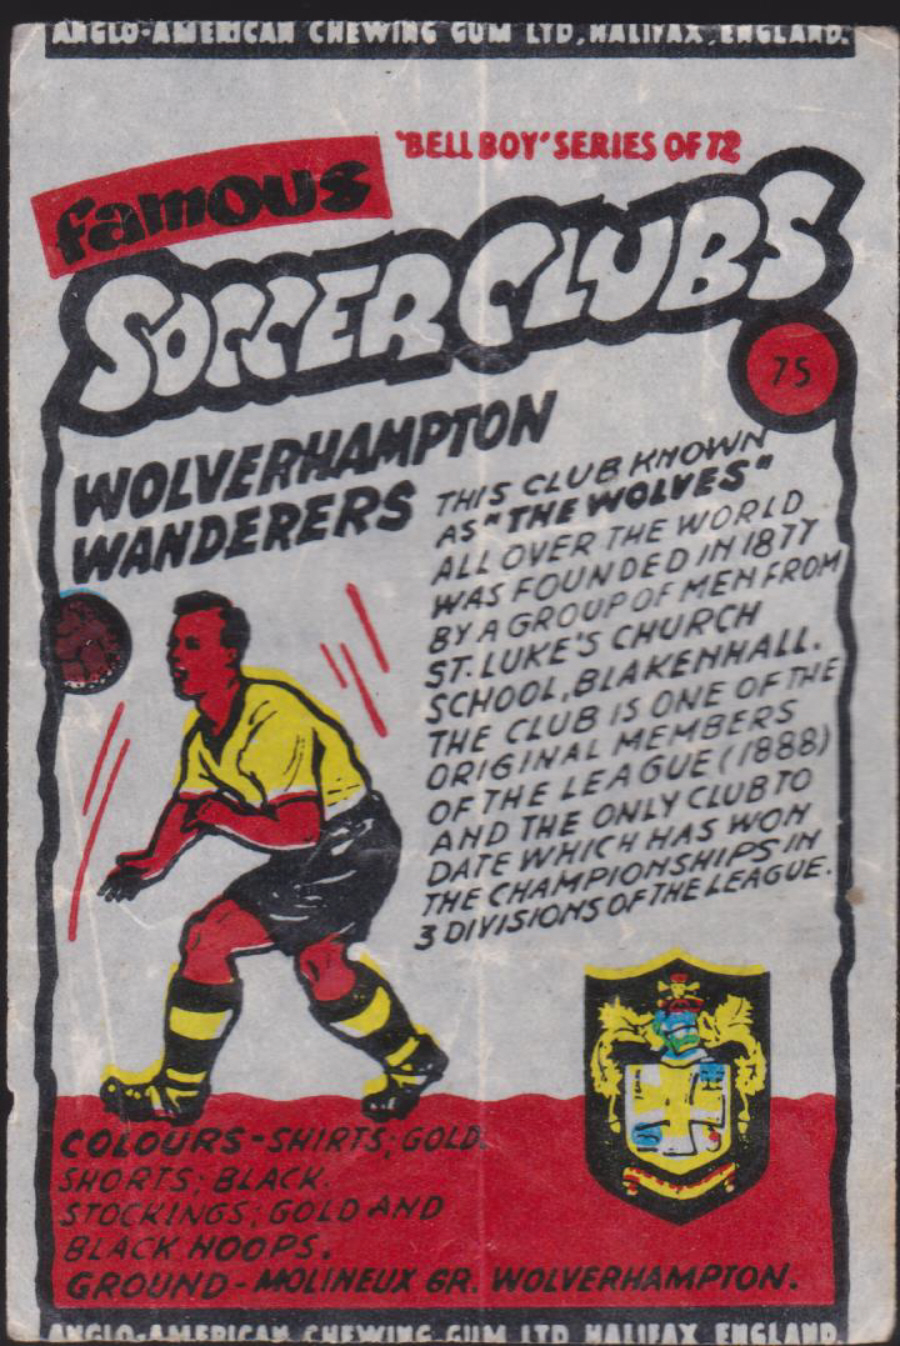 Anglo-American-Chewing-Gum-Wax-Wrapper-Famous-Soccer-Clubs-No-75 - Wolverhampton Wanderers